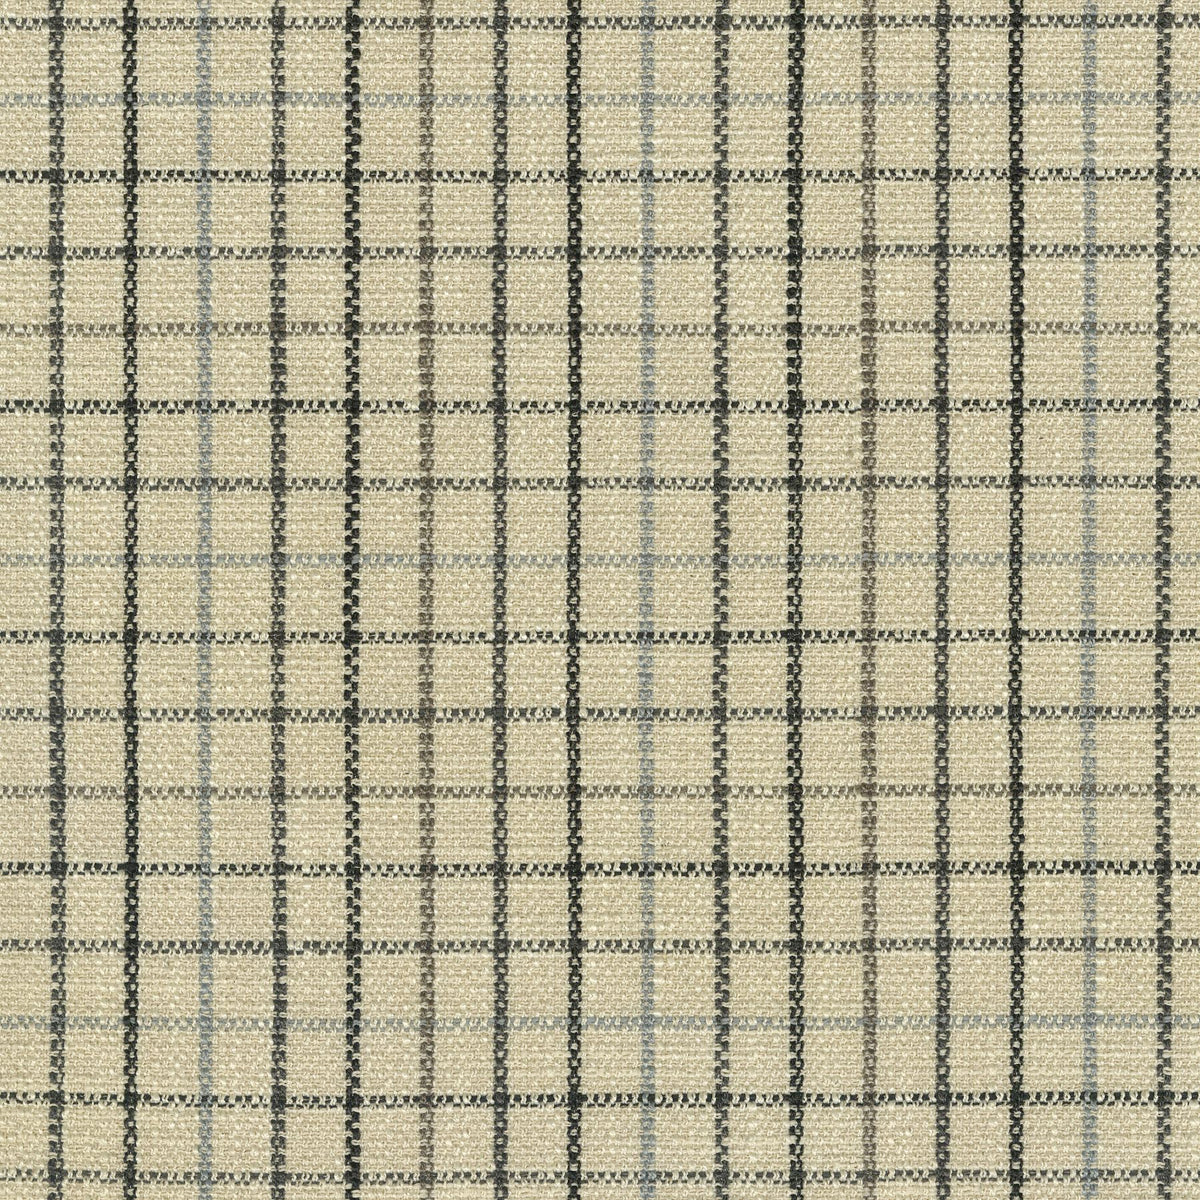 P/K Lifestyles Keep In Check - Stone 411580 Upholstery Fabric